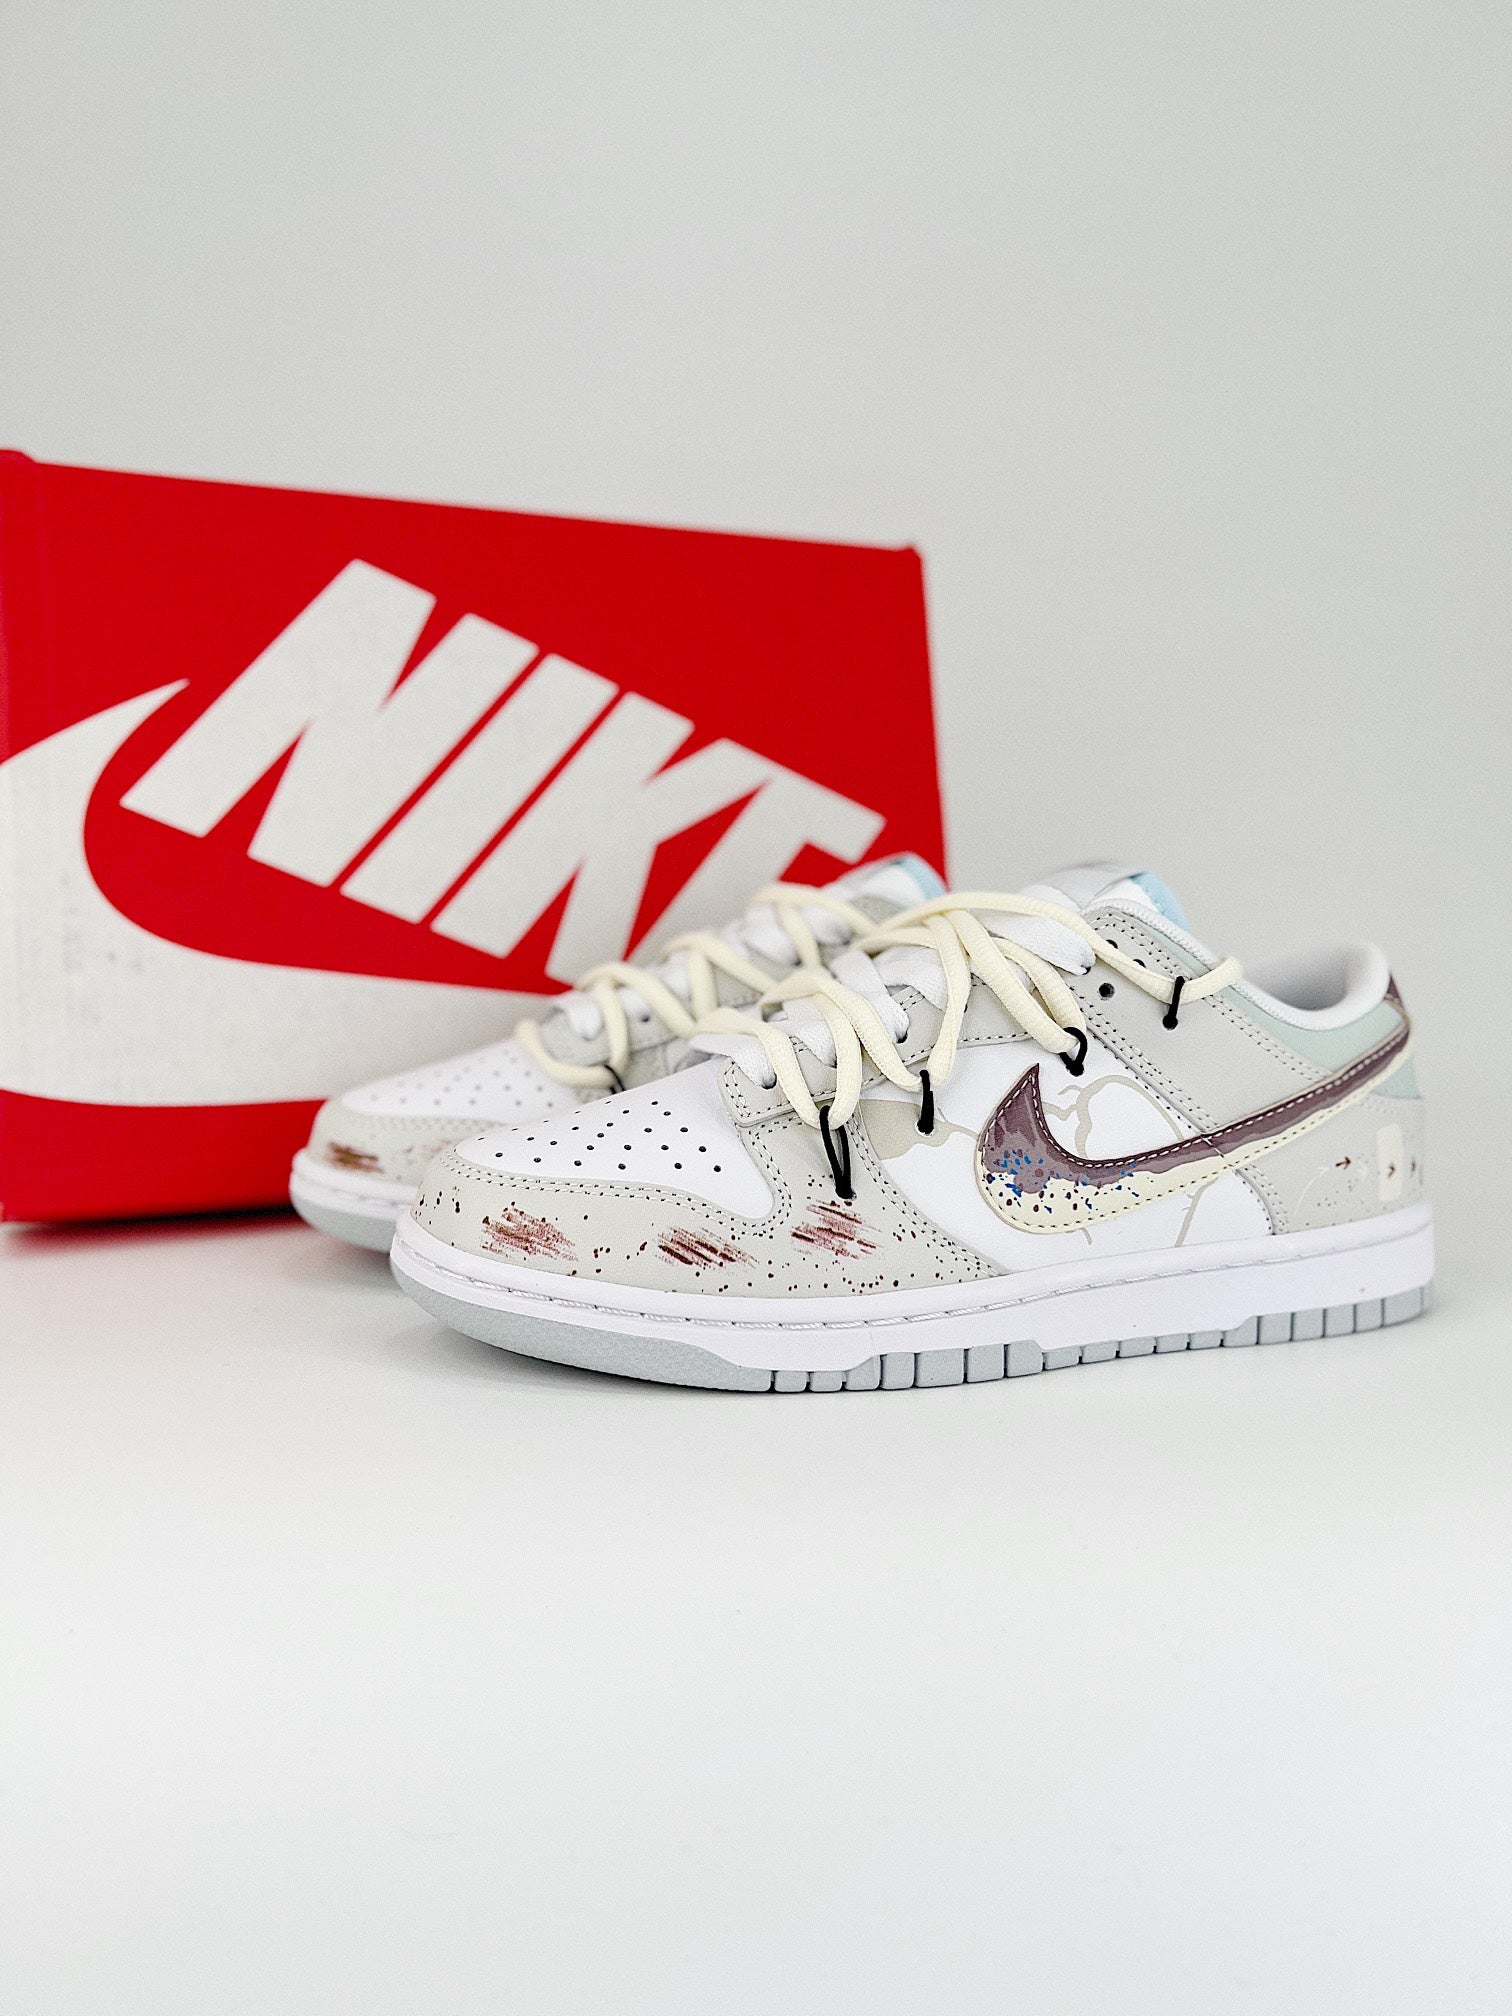 Nike SB Dunk Low scratches